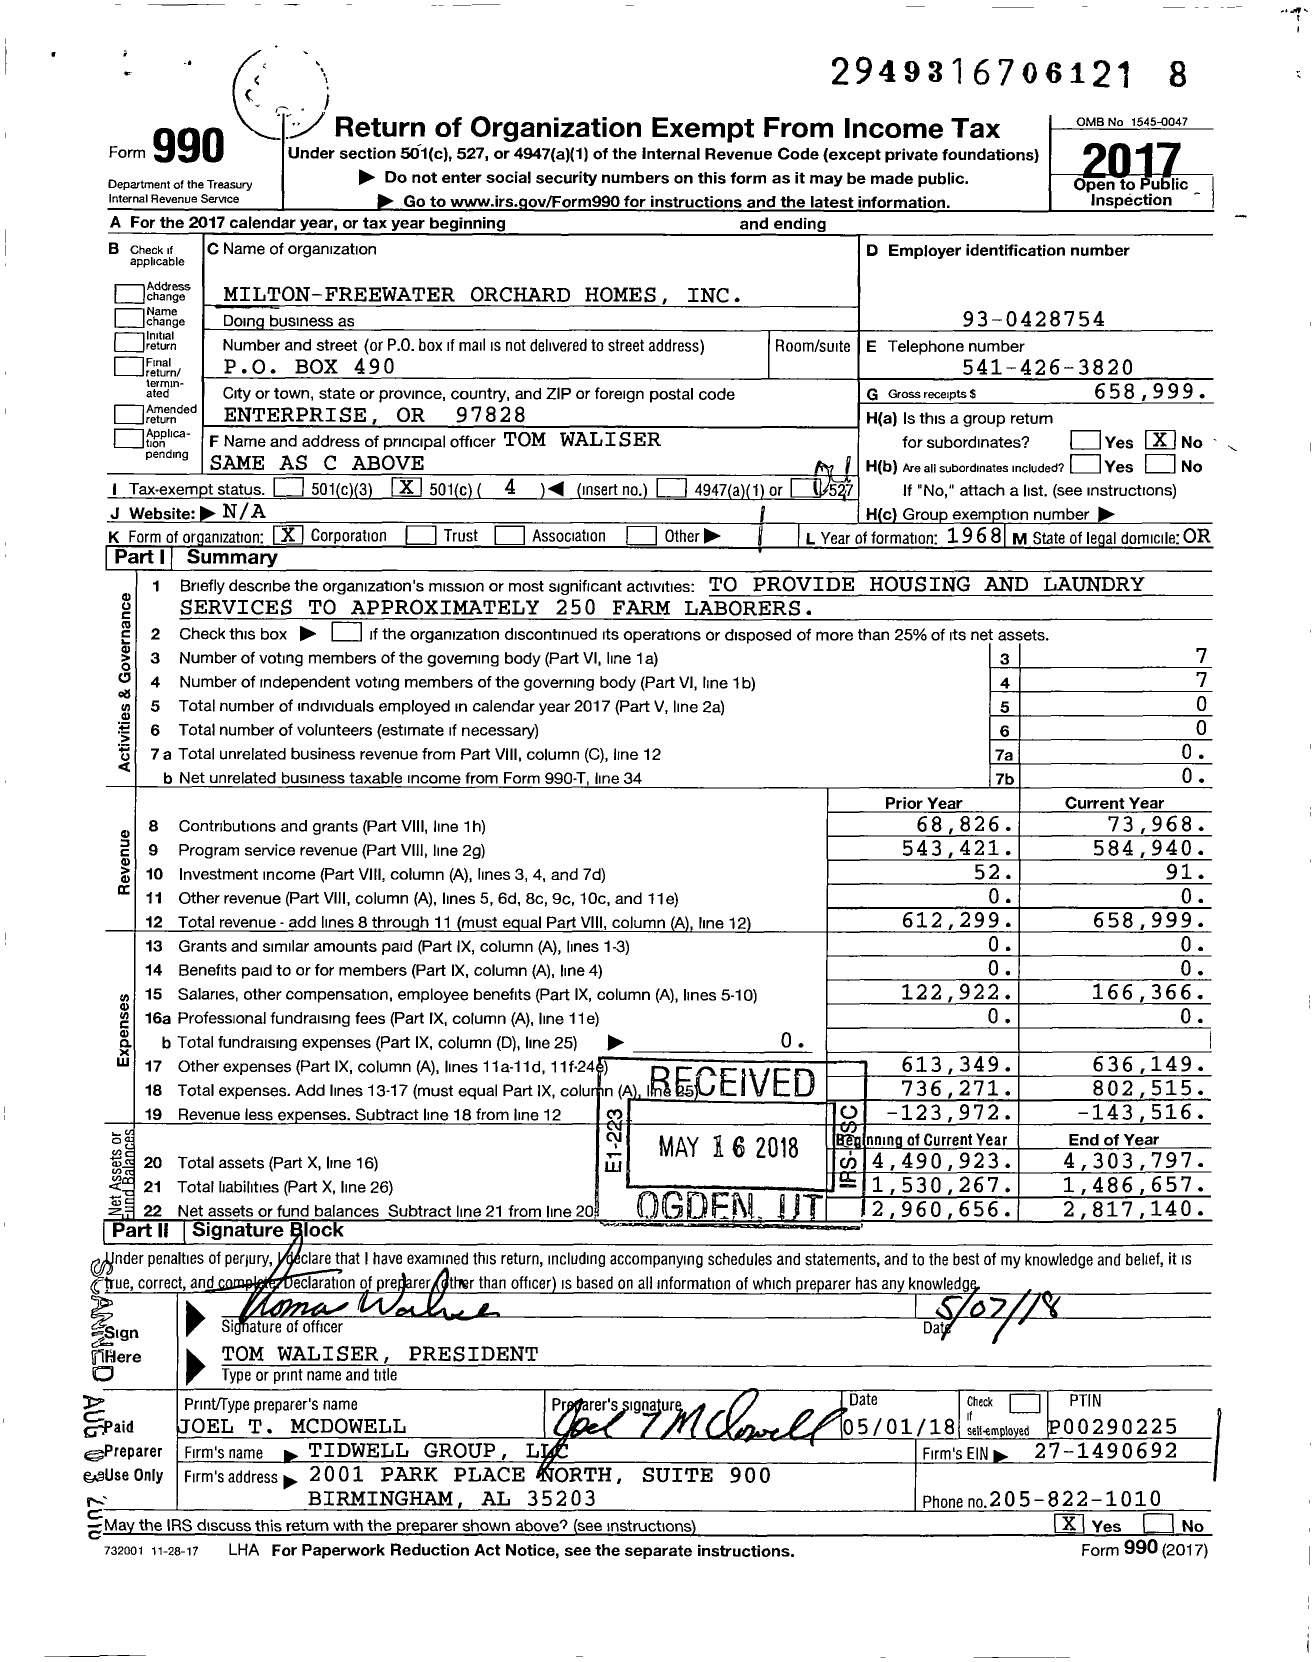 Image of first page of 2017 Form 990O for Milton-Freewater Orchard Homes